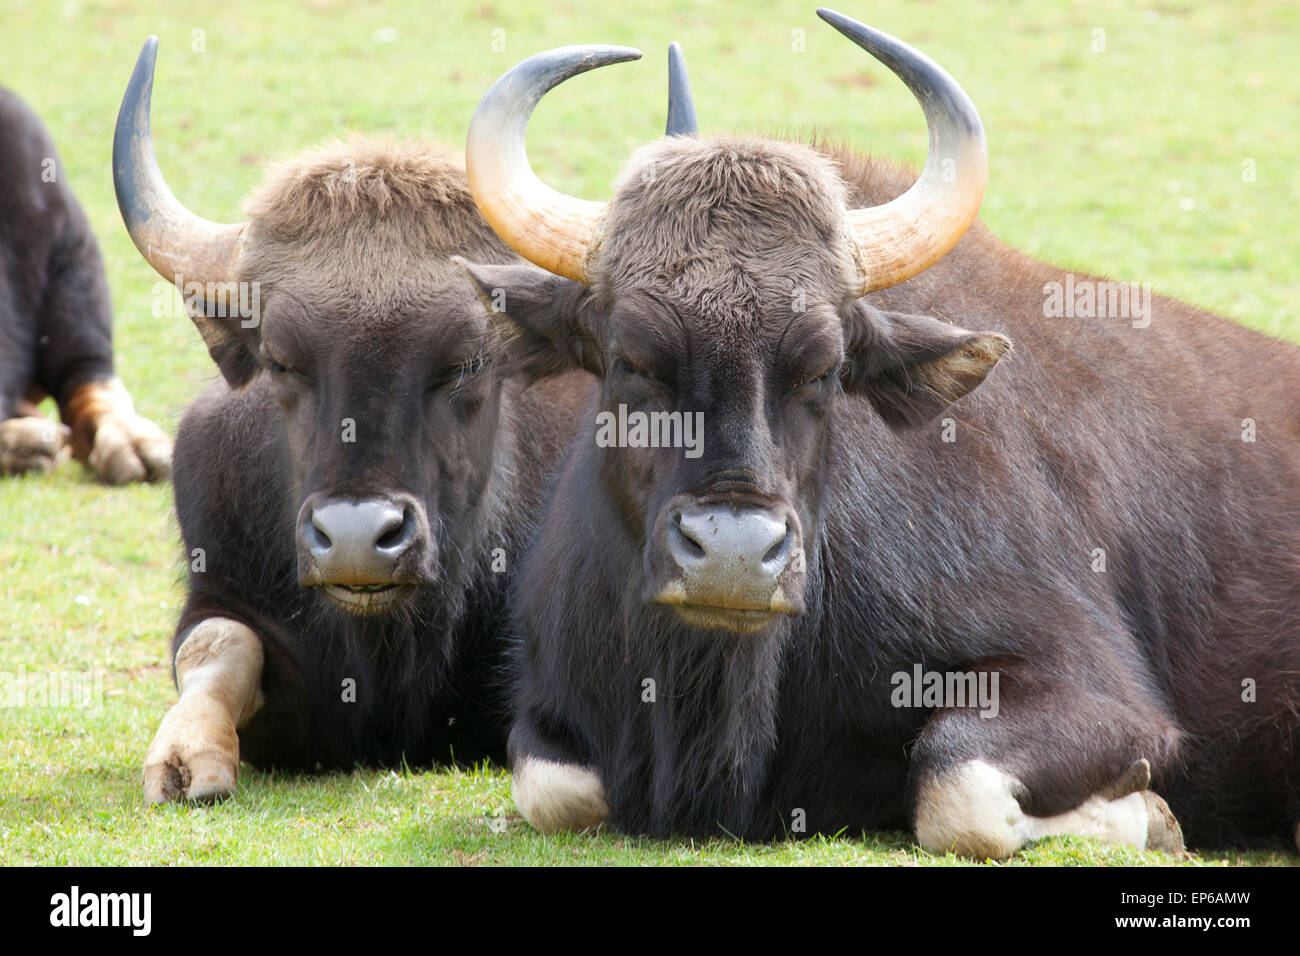 Two Indian Bison sitting in a field Stock Photo